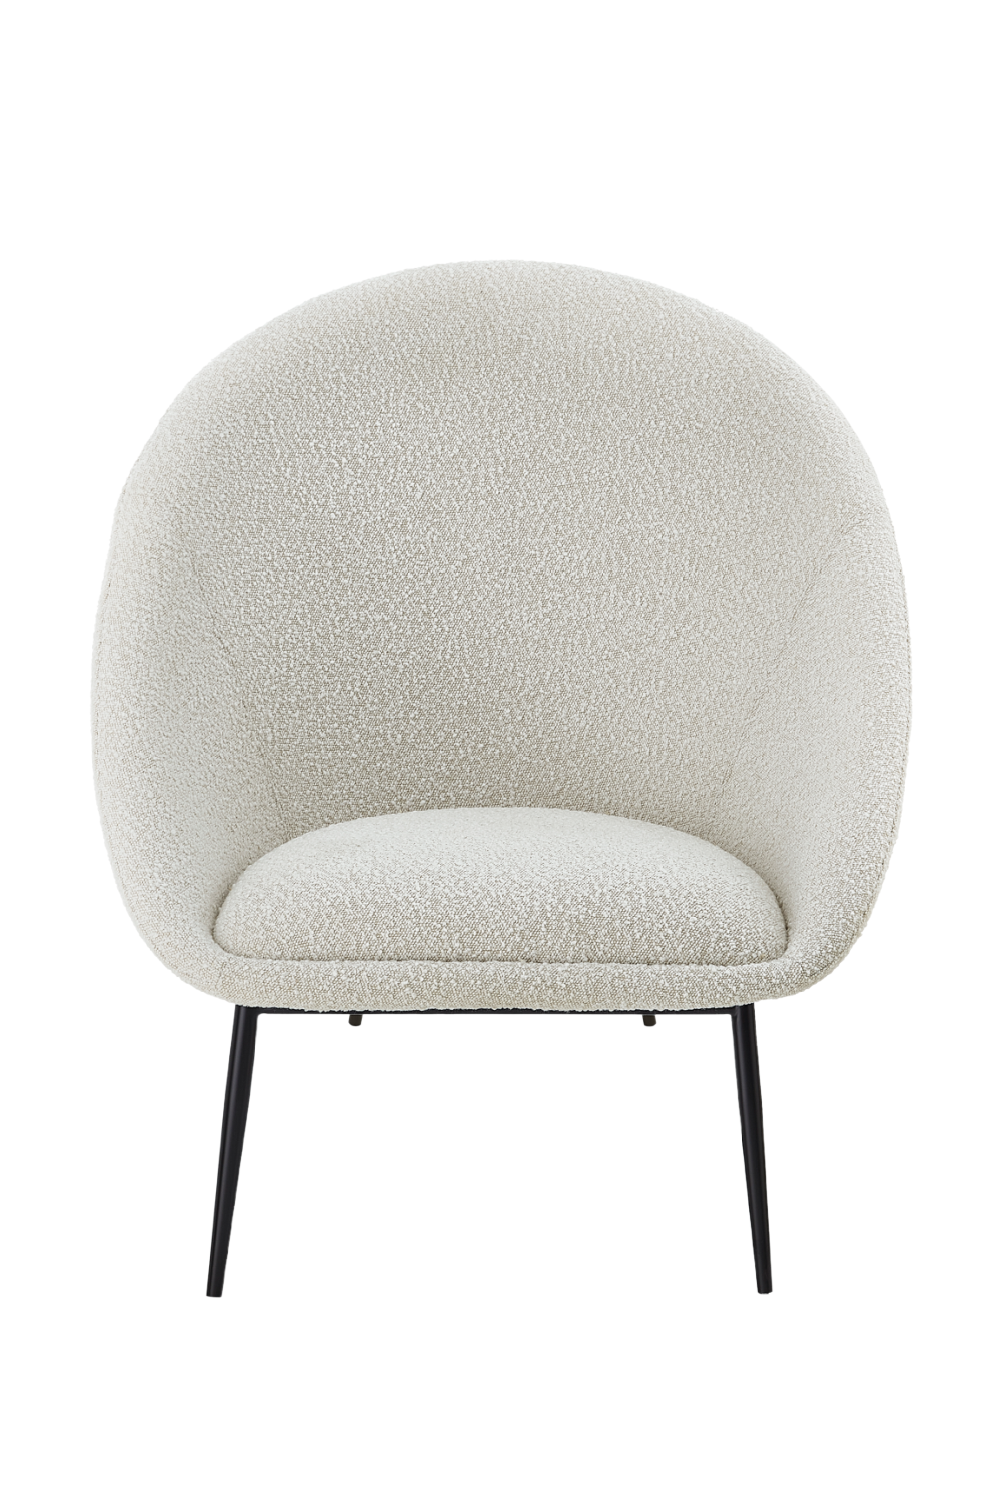 Rounded Bouclé Occasional Chair | Liang & Eimil Ovalo | OROA.com